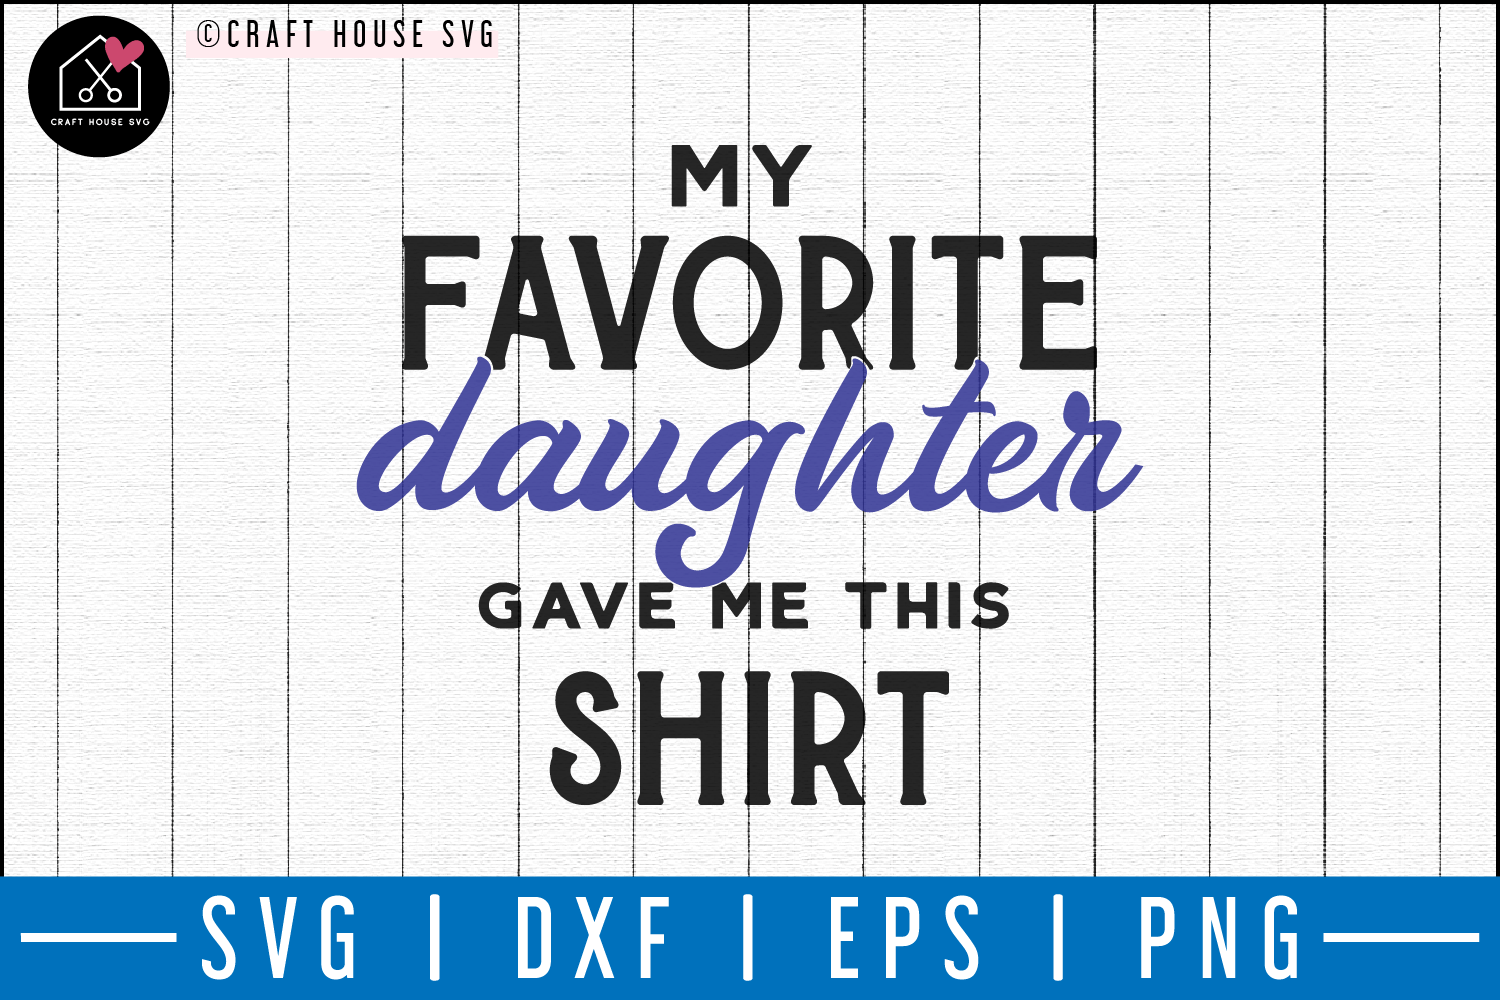 My favorite daughter gave me this shirt SVG | M50F | Dad SVG cut file Craft House SVG - SVG files for Cricut and Silhouette